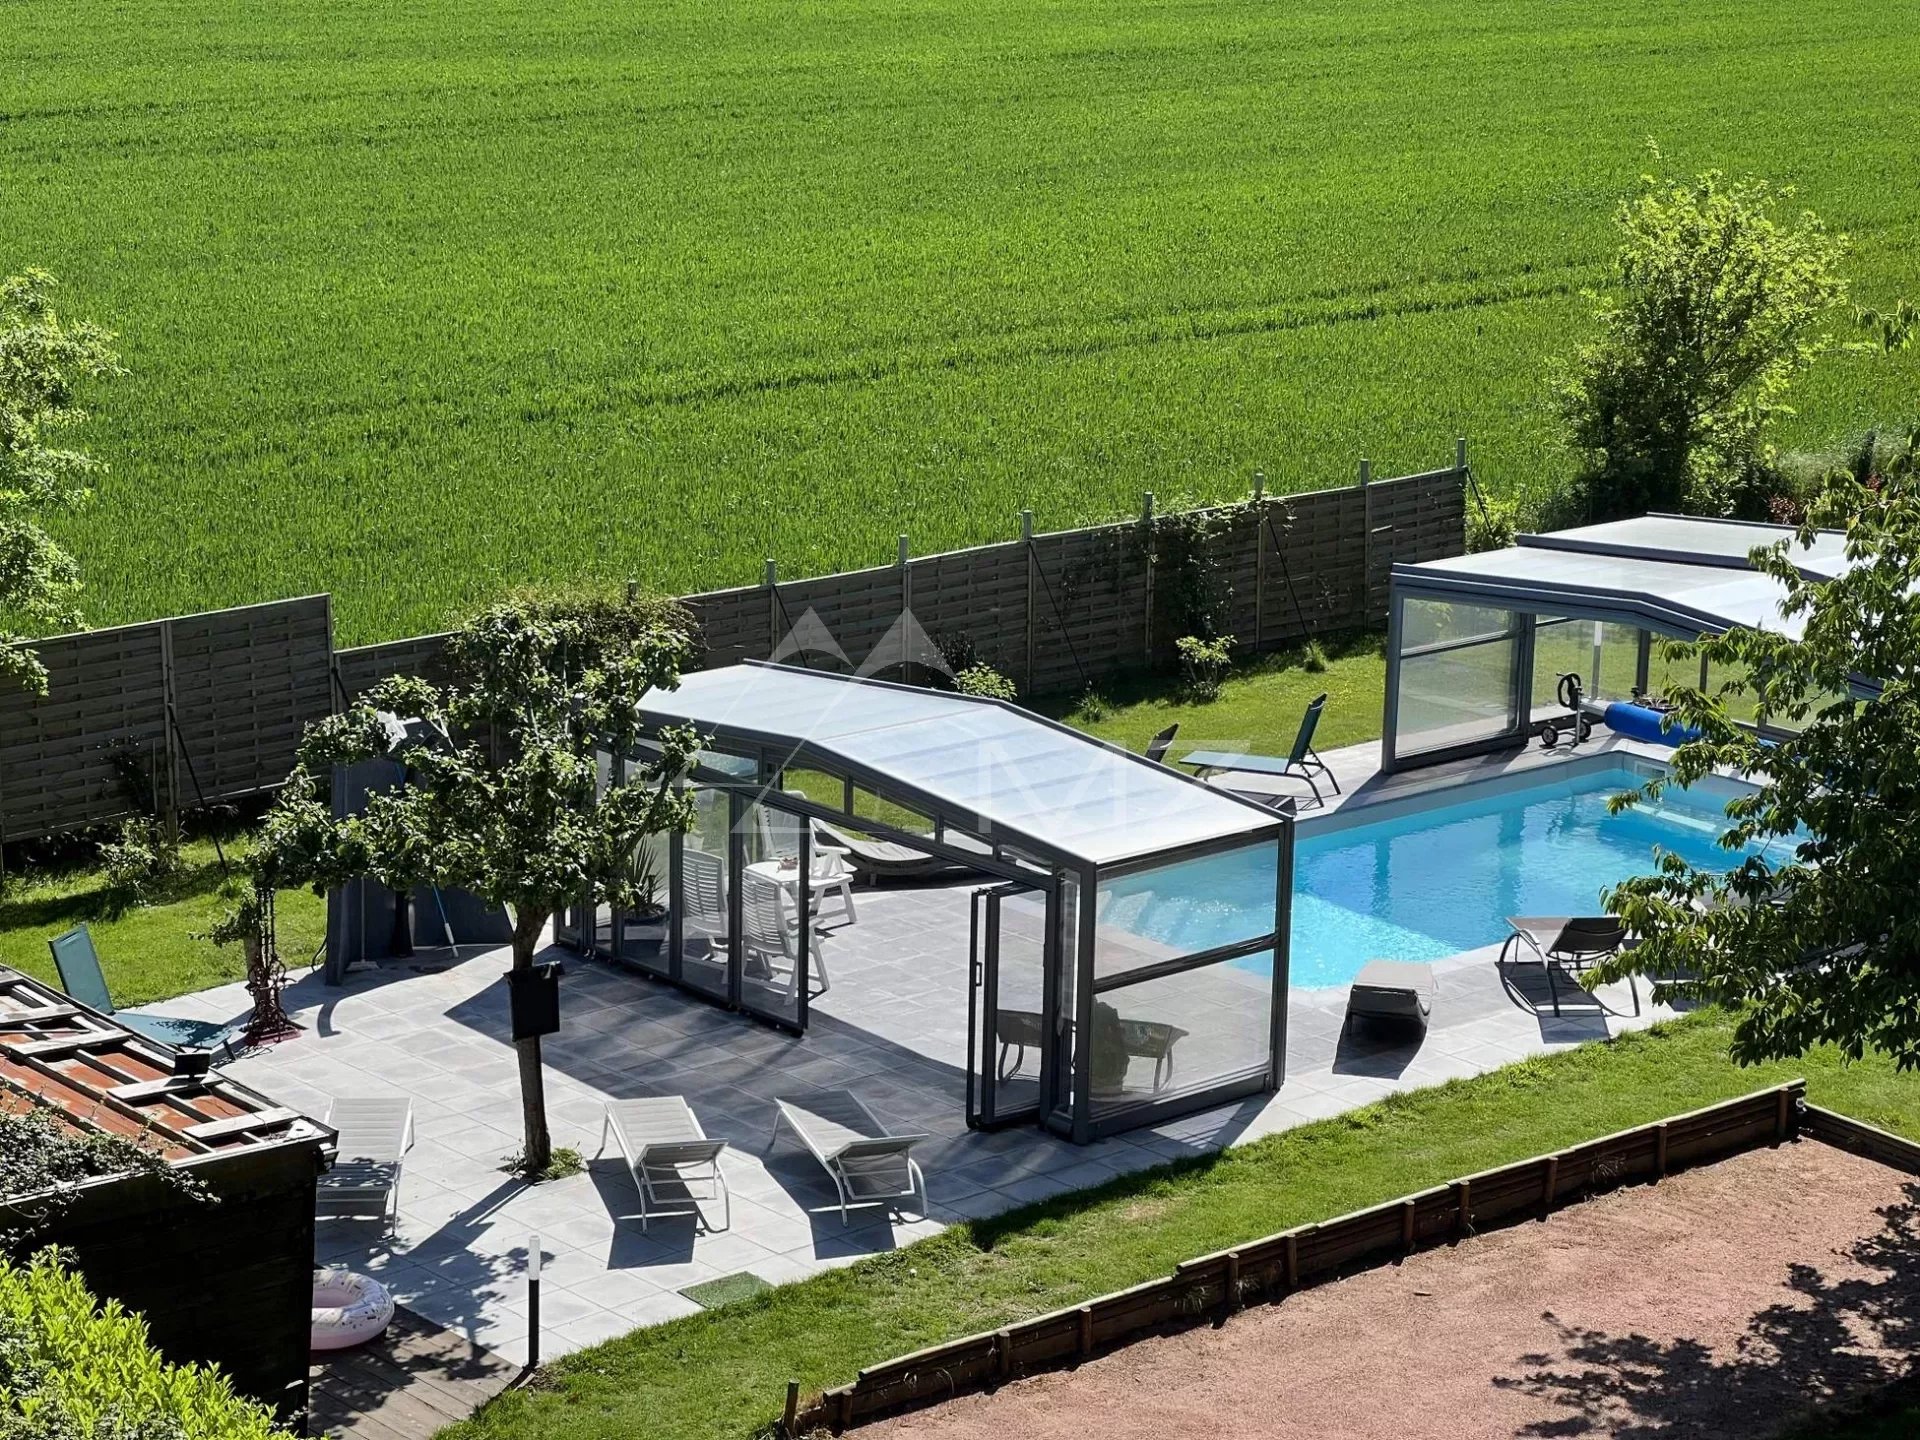 Large bourgeois style Property with outbuilding and swimming pool